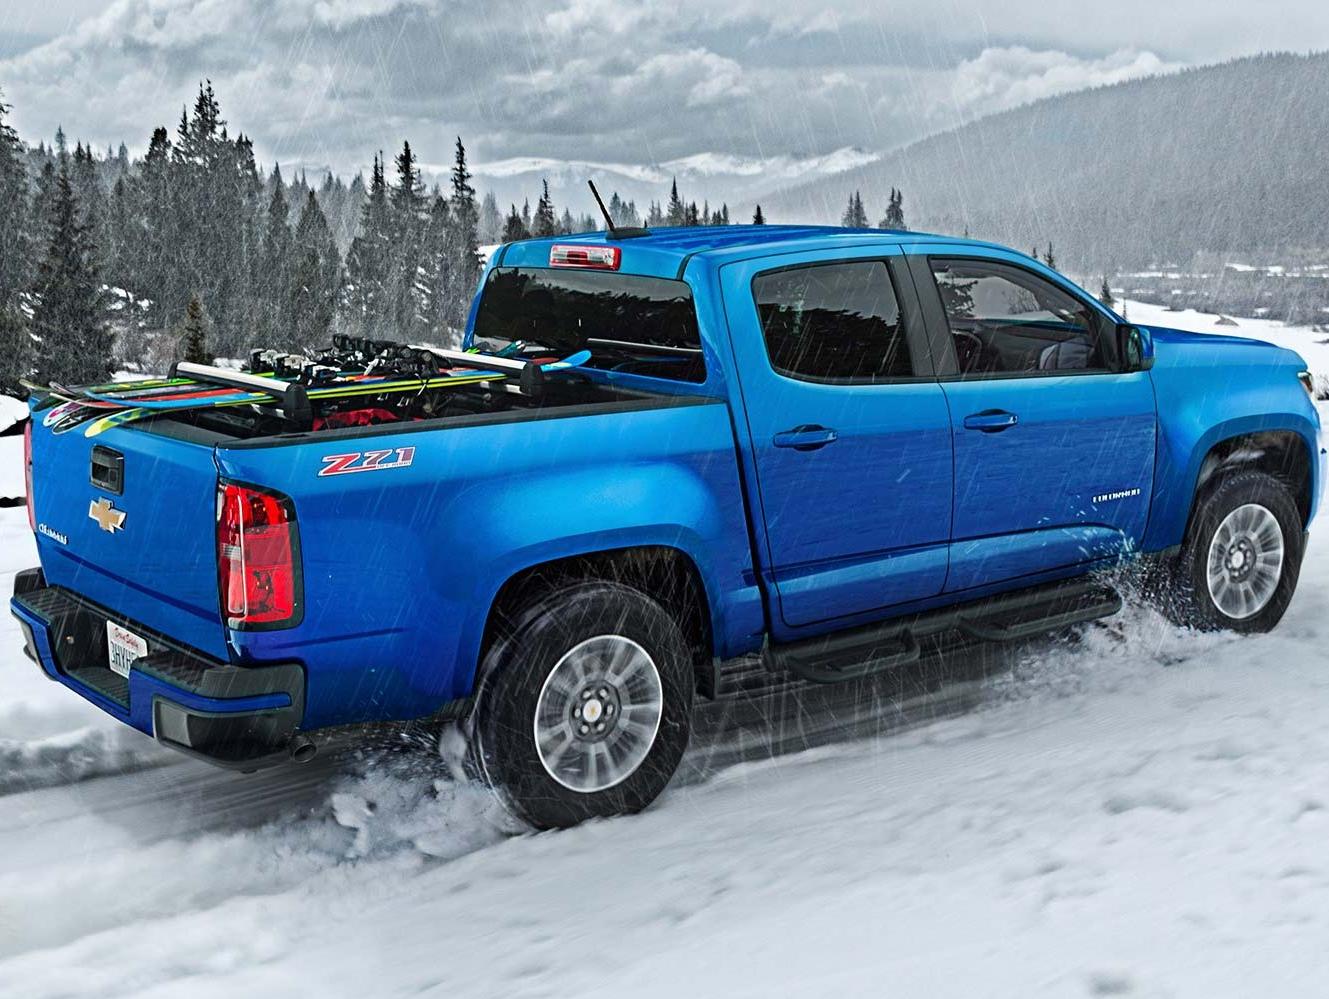 2019 Chevy Colorado feature Safety